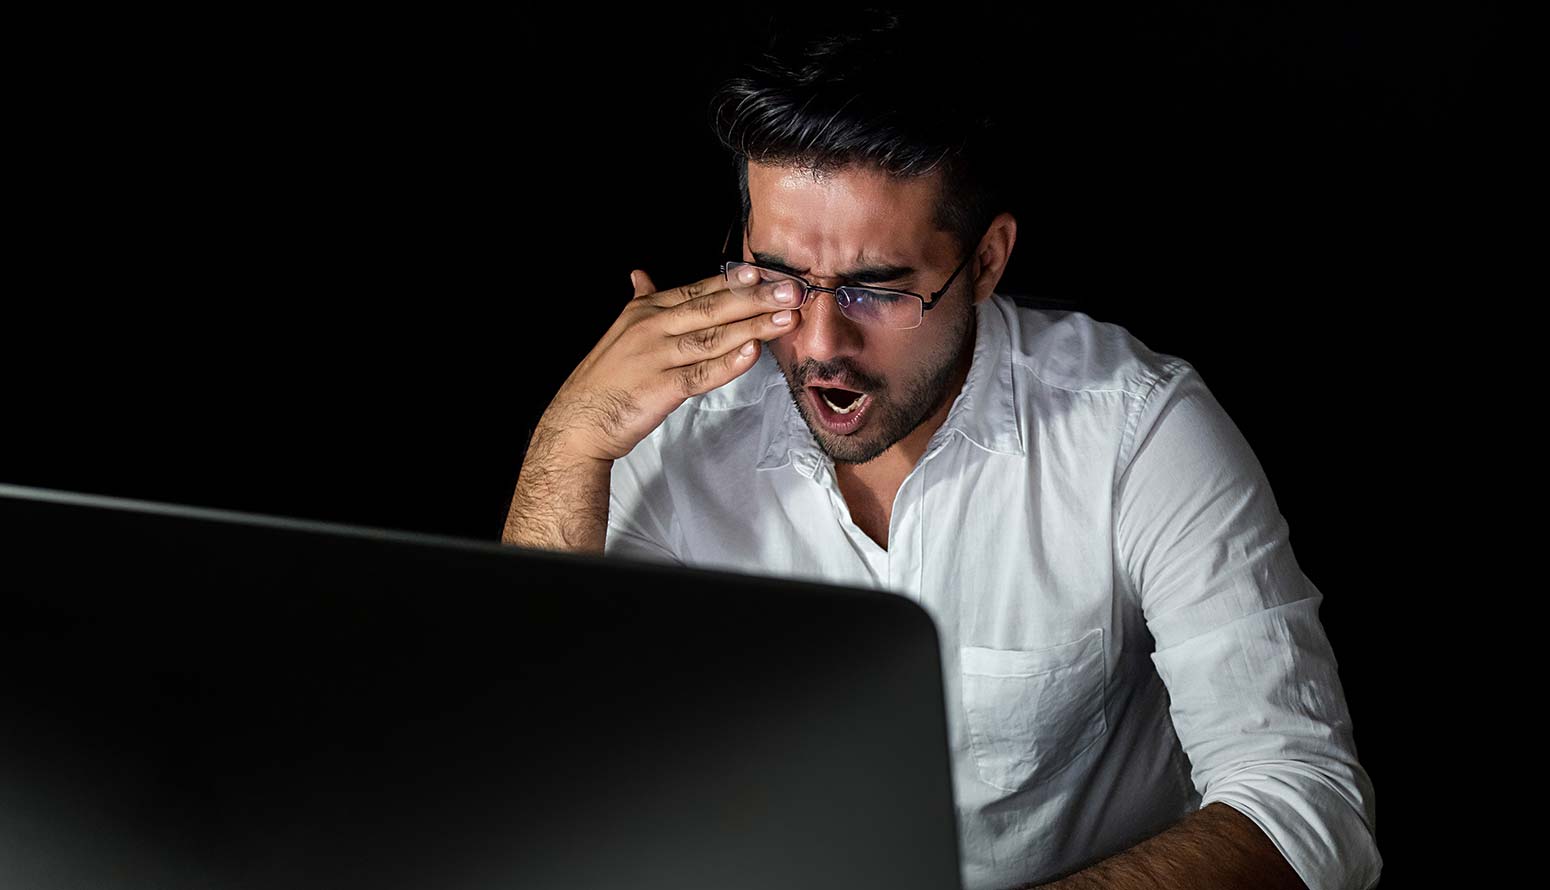 a man yawning while sitting in front of laptop